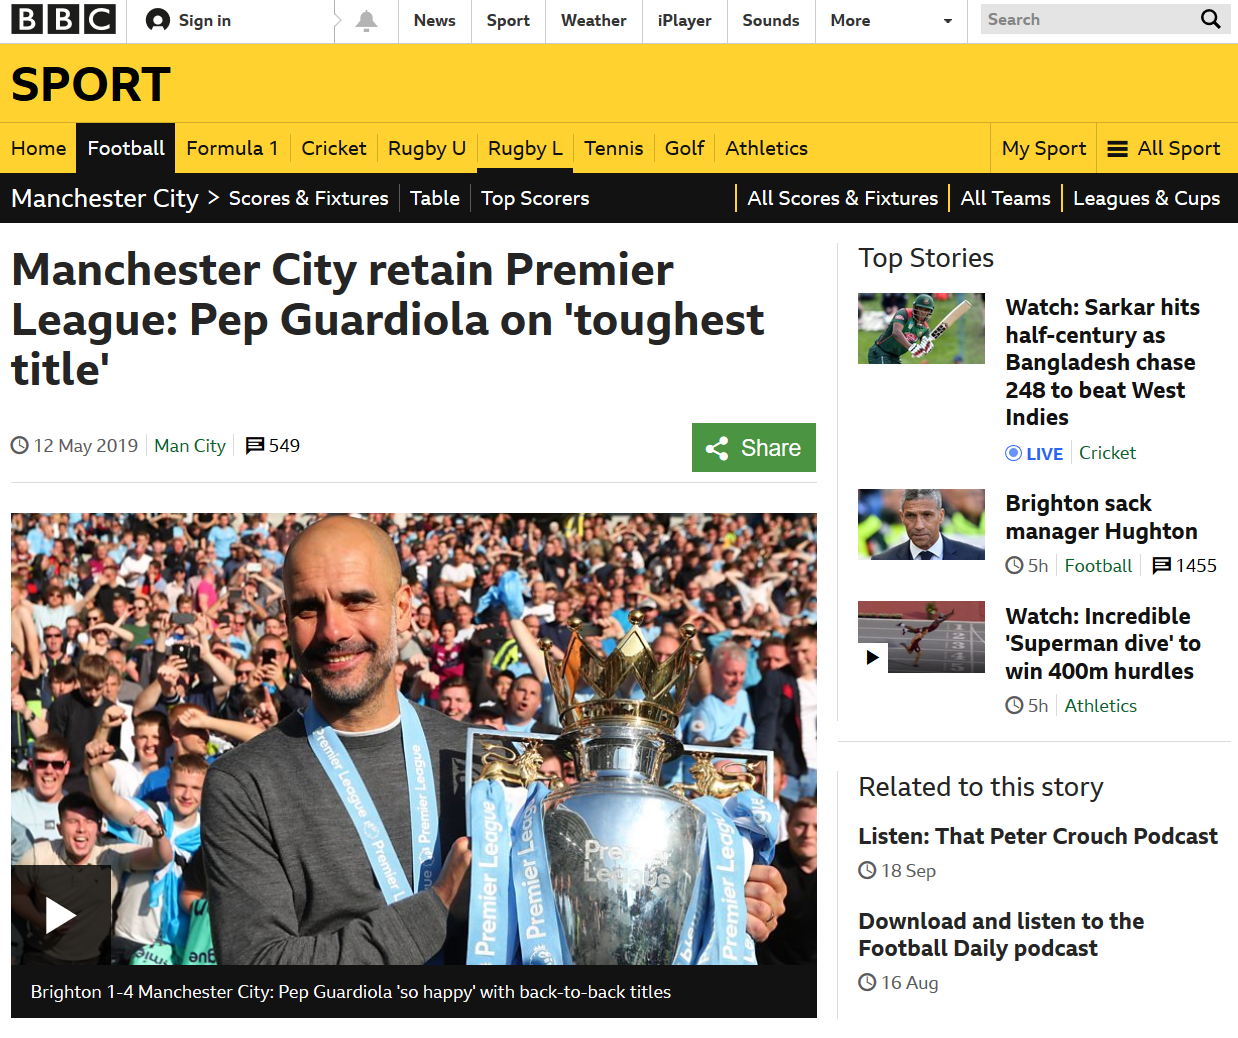 Sports on the BBC News site